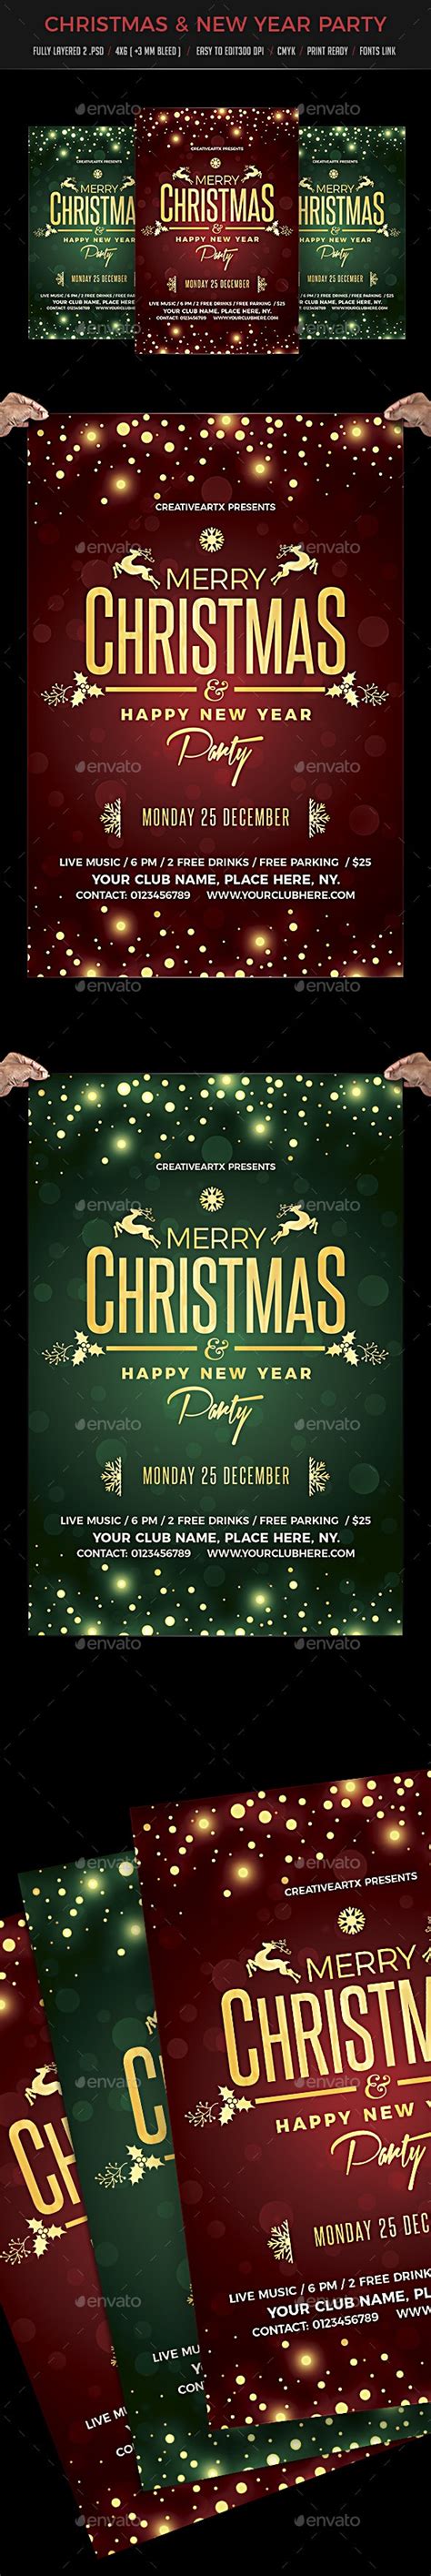 Christmas & New Year Party Flyer by creativeartx | GraphicRiver